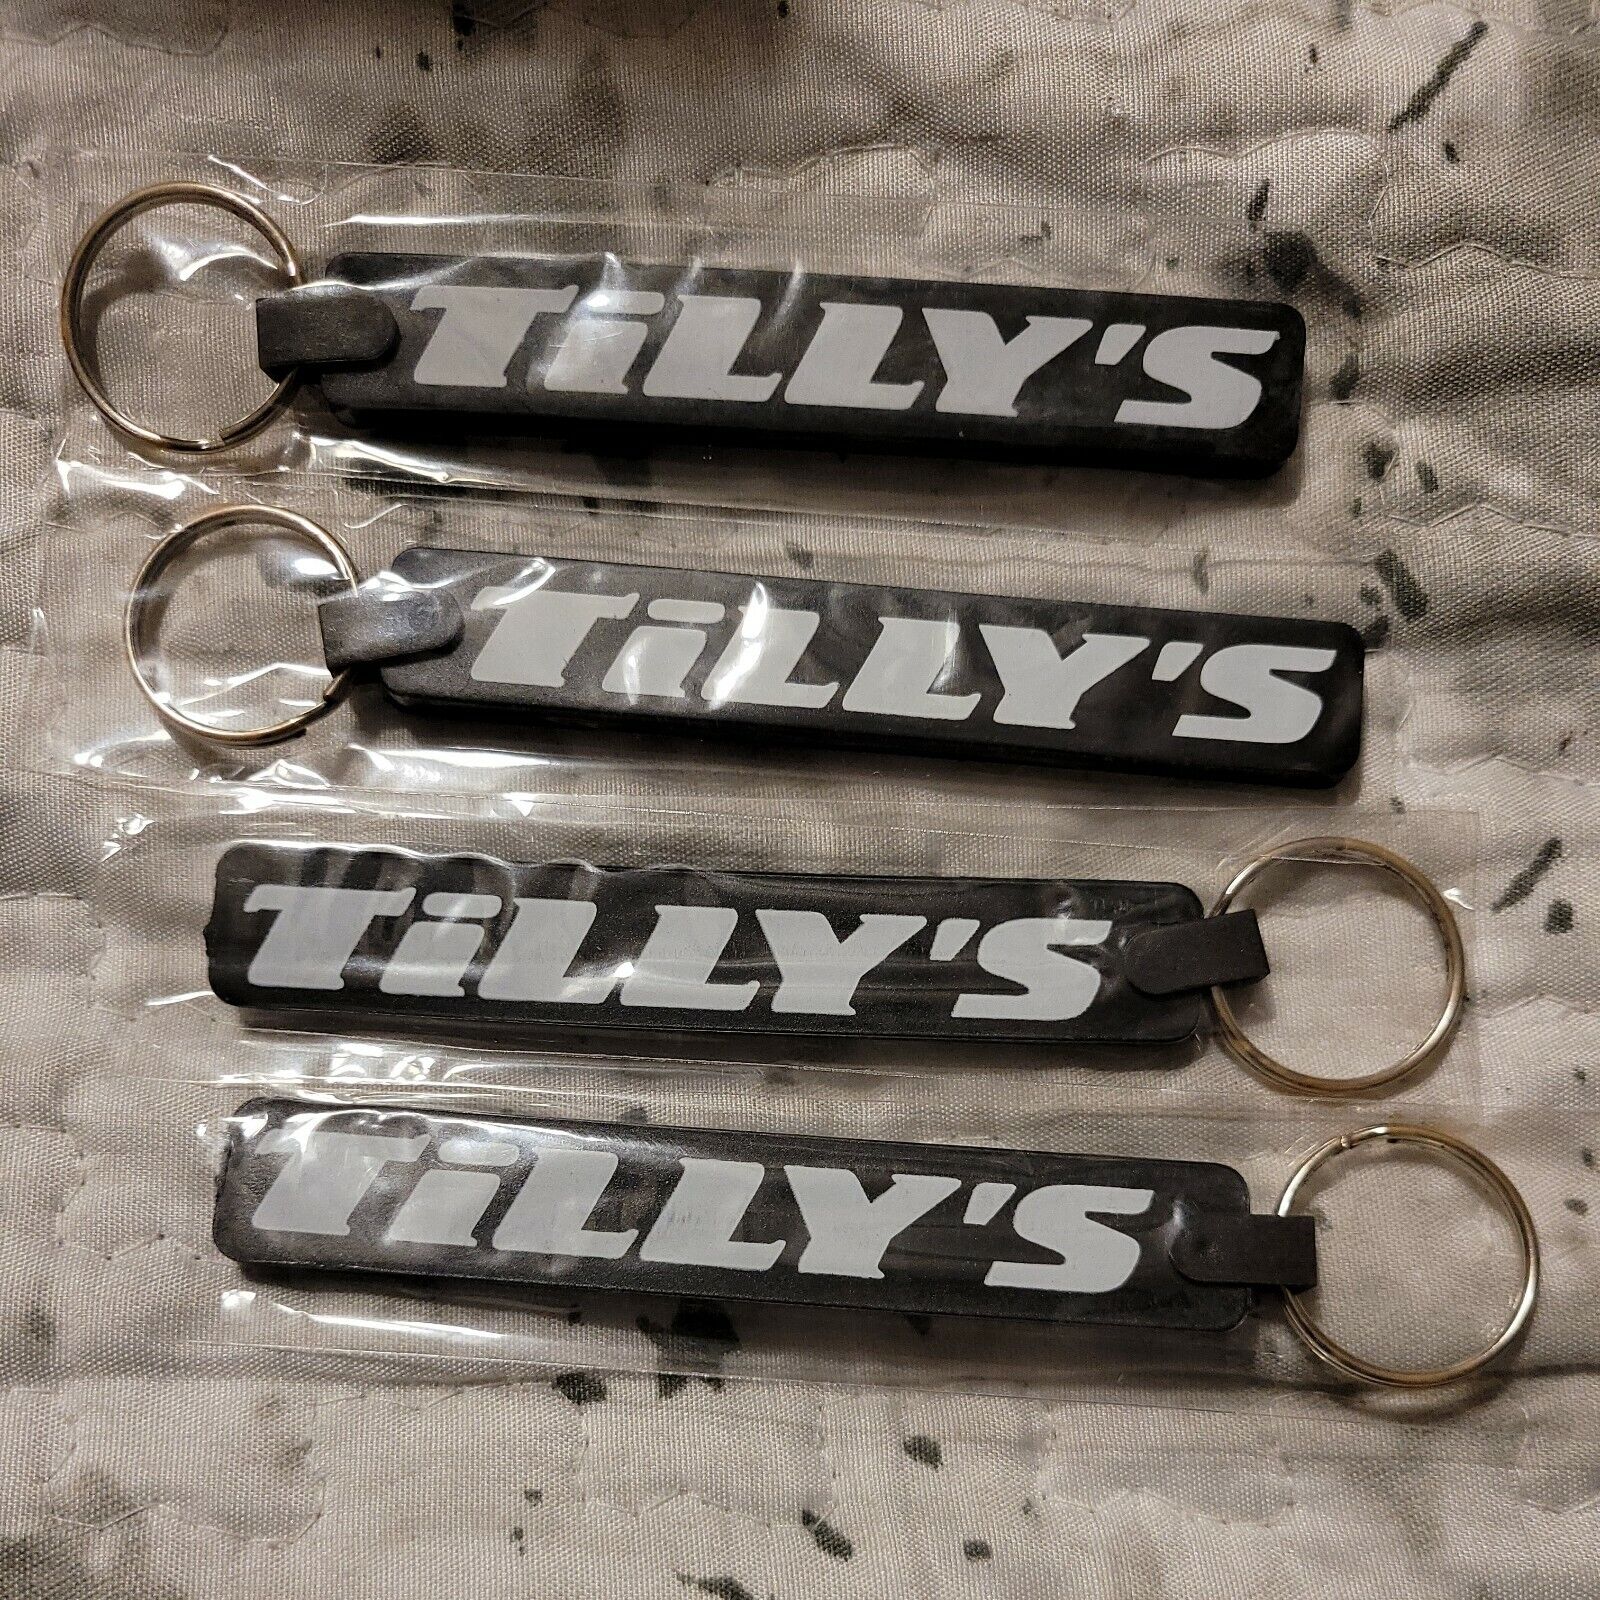 4 Tilly’s Key Chains  , bag tag